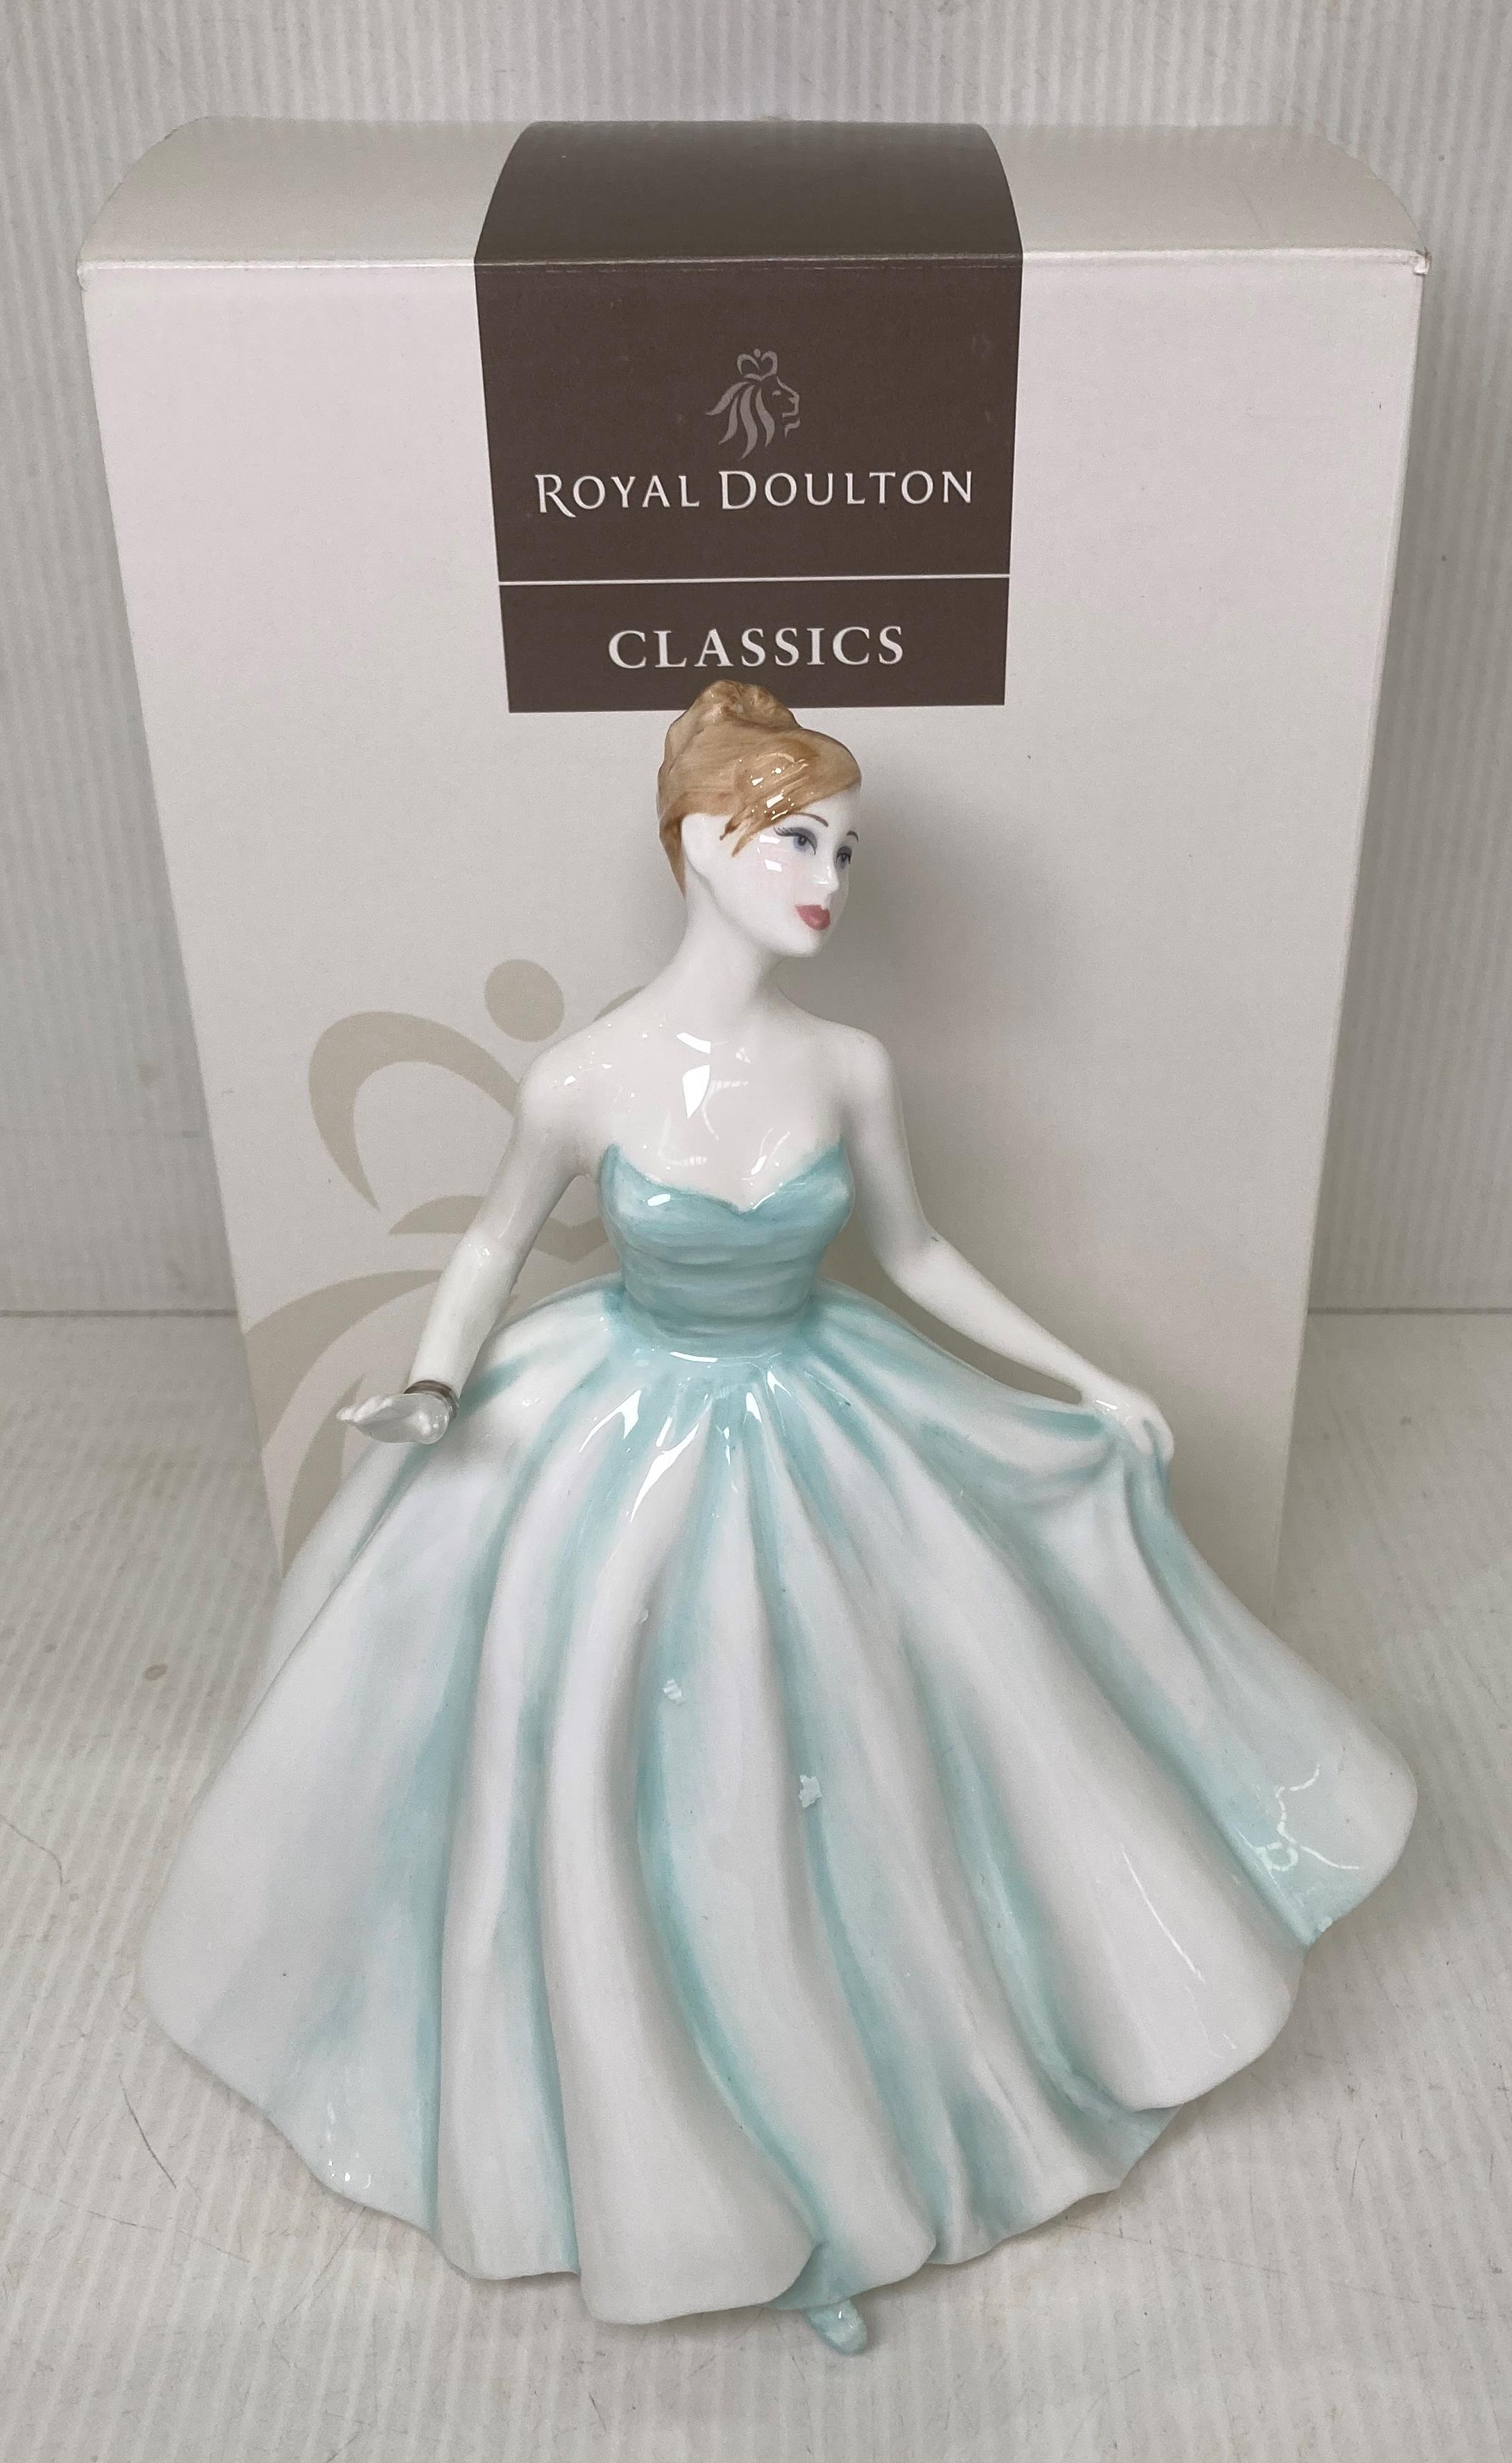 A Limited Edition Royal Doulton 'Caroline' figurine with box and authenticity no: 0096/1000